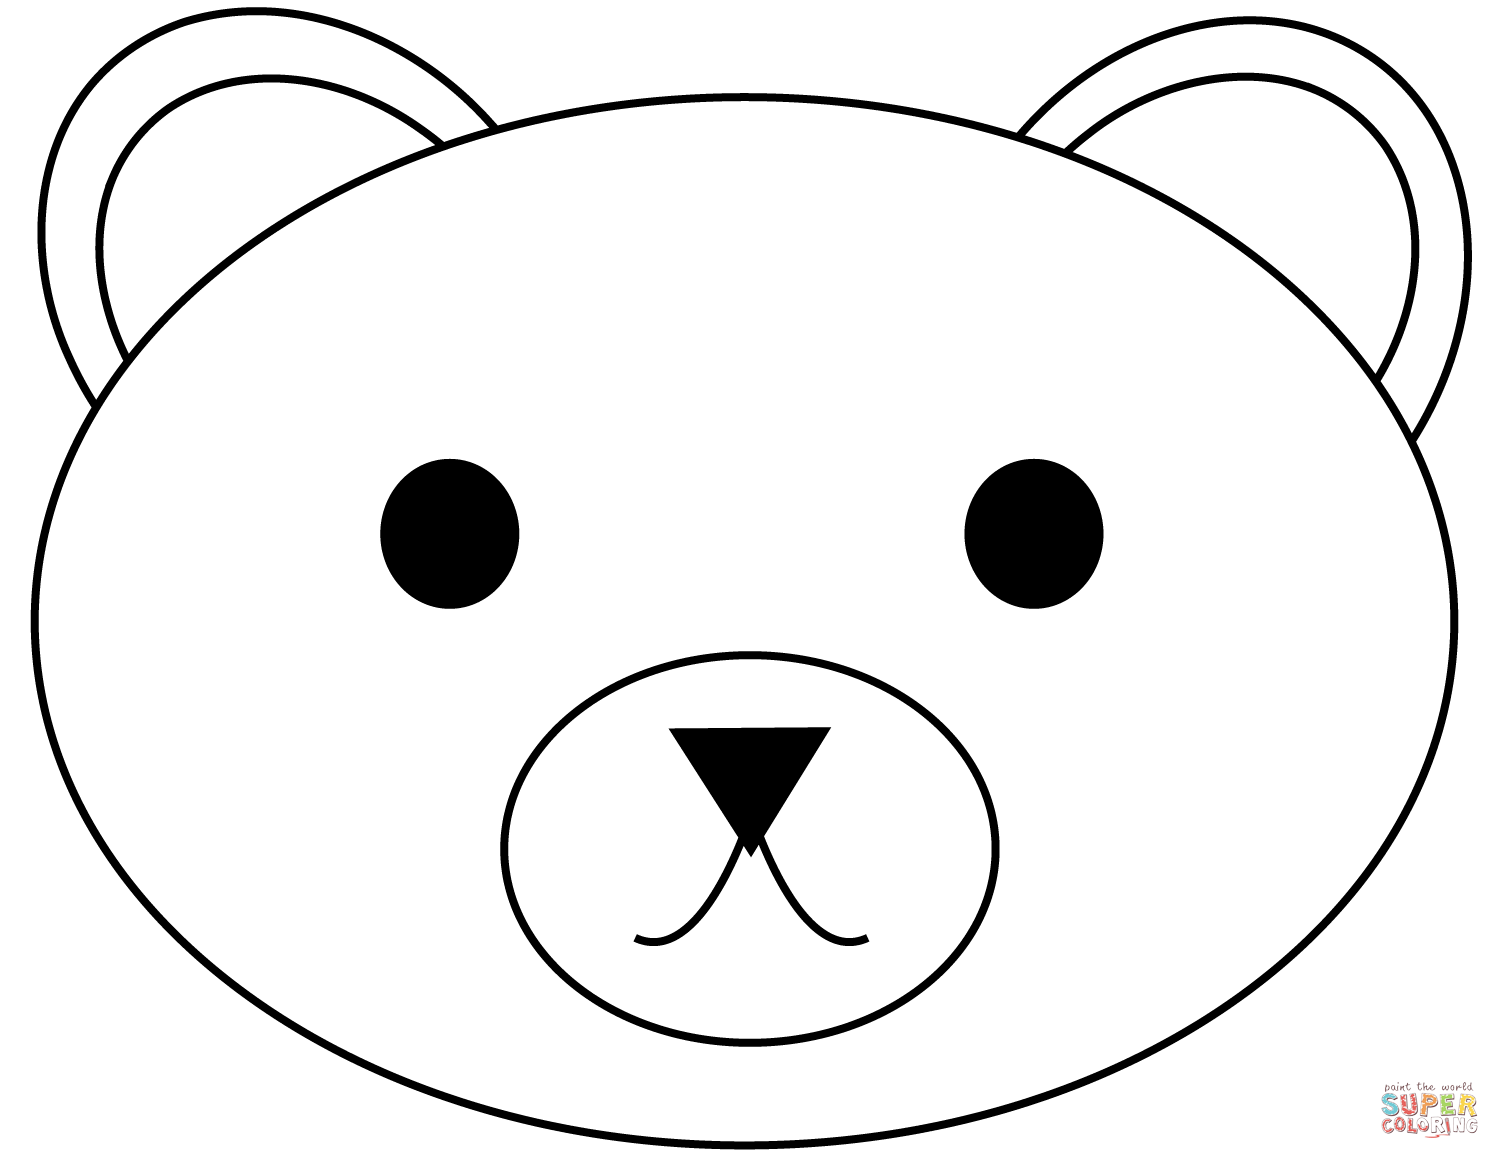 Bear Head coloring page | Free Printable Coloring Pages